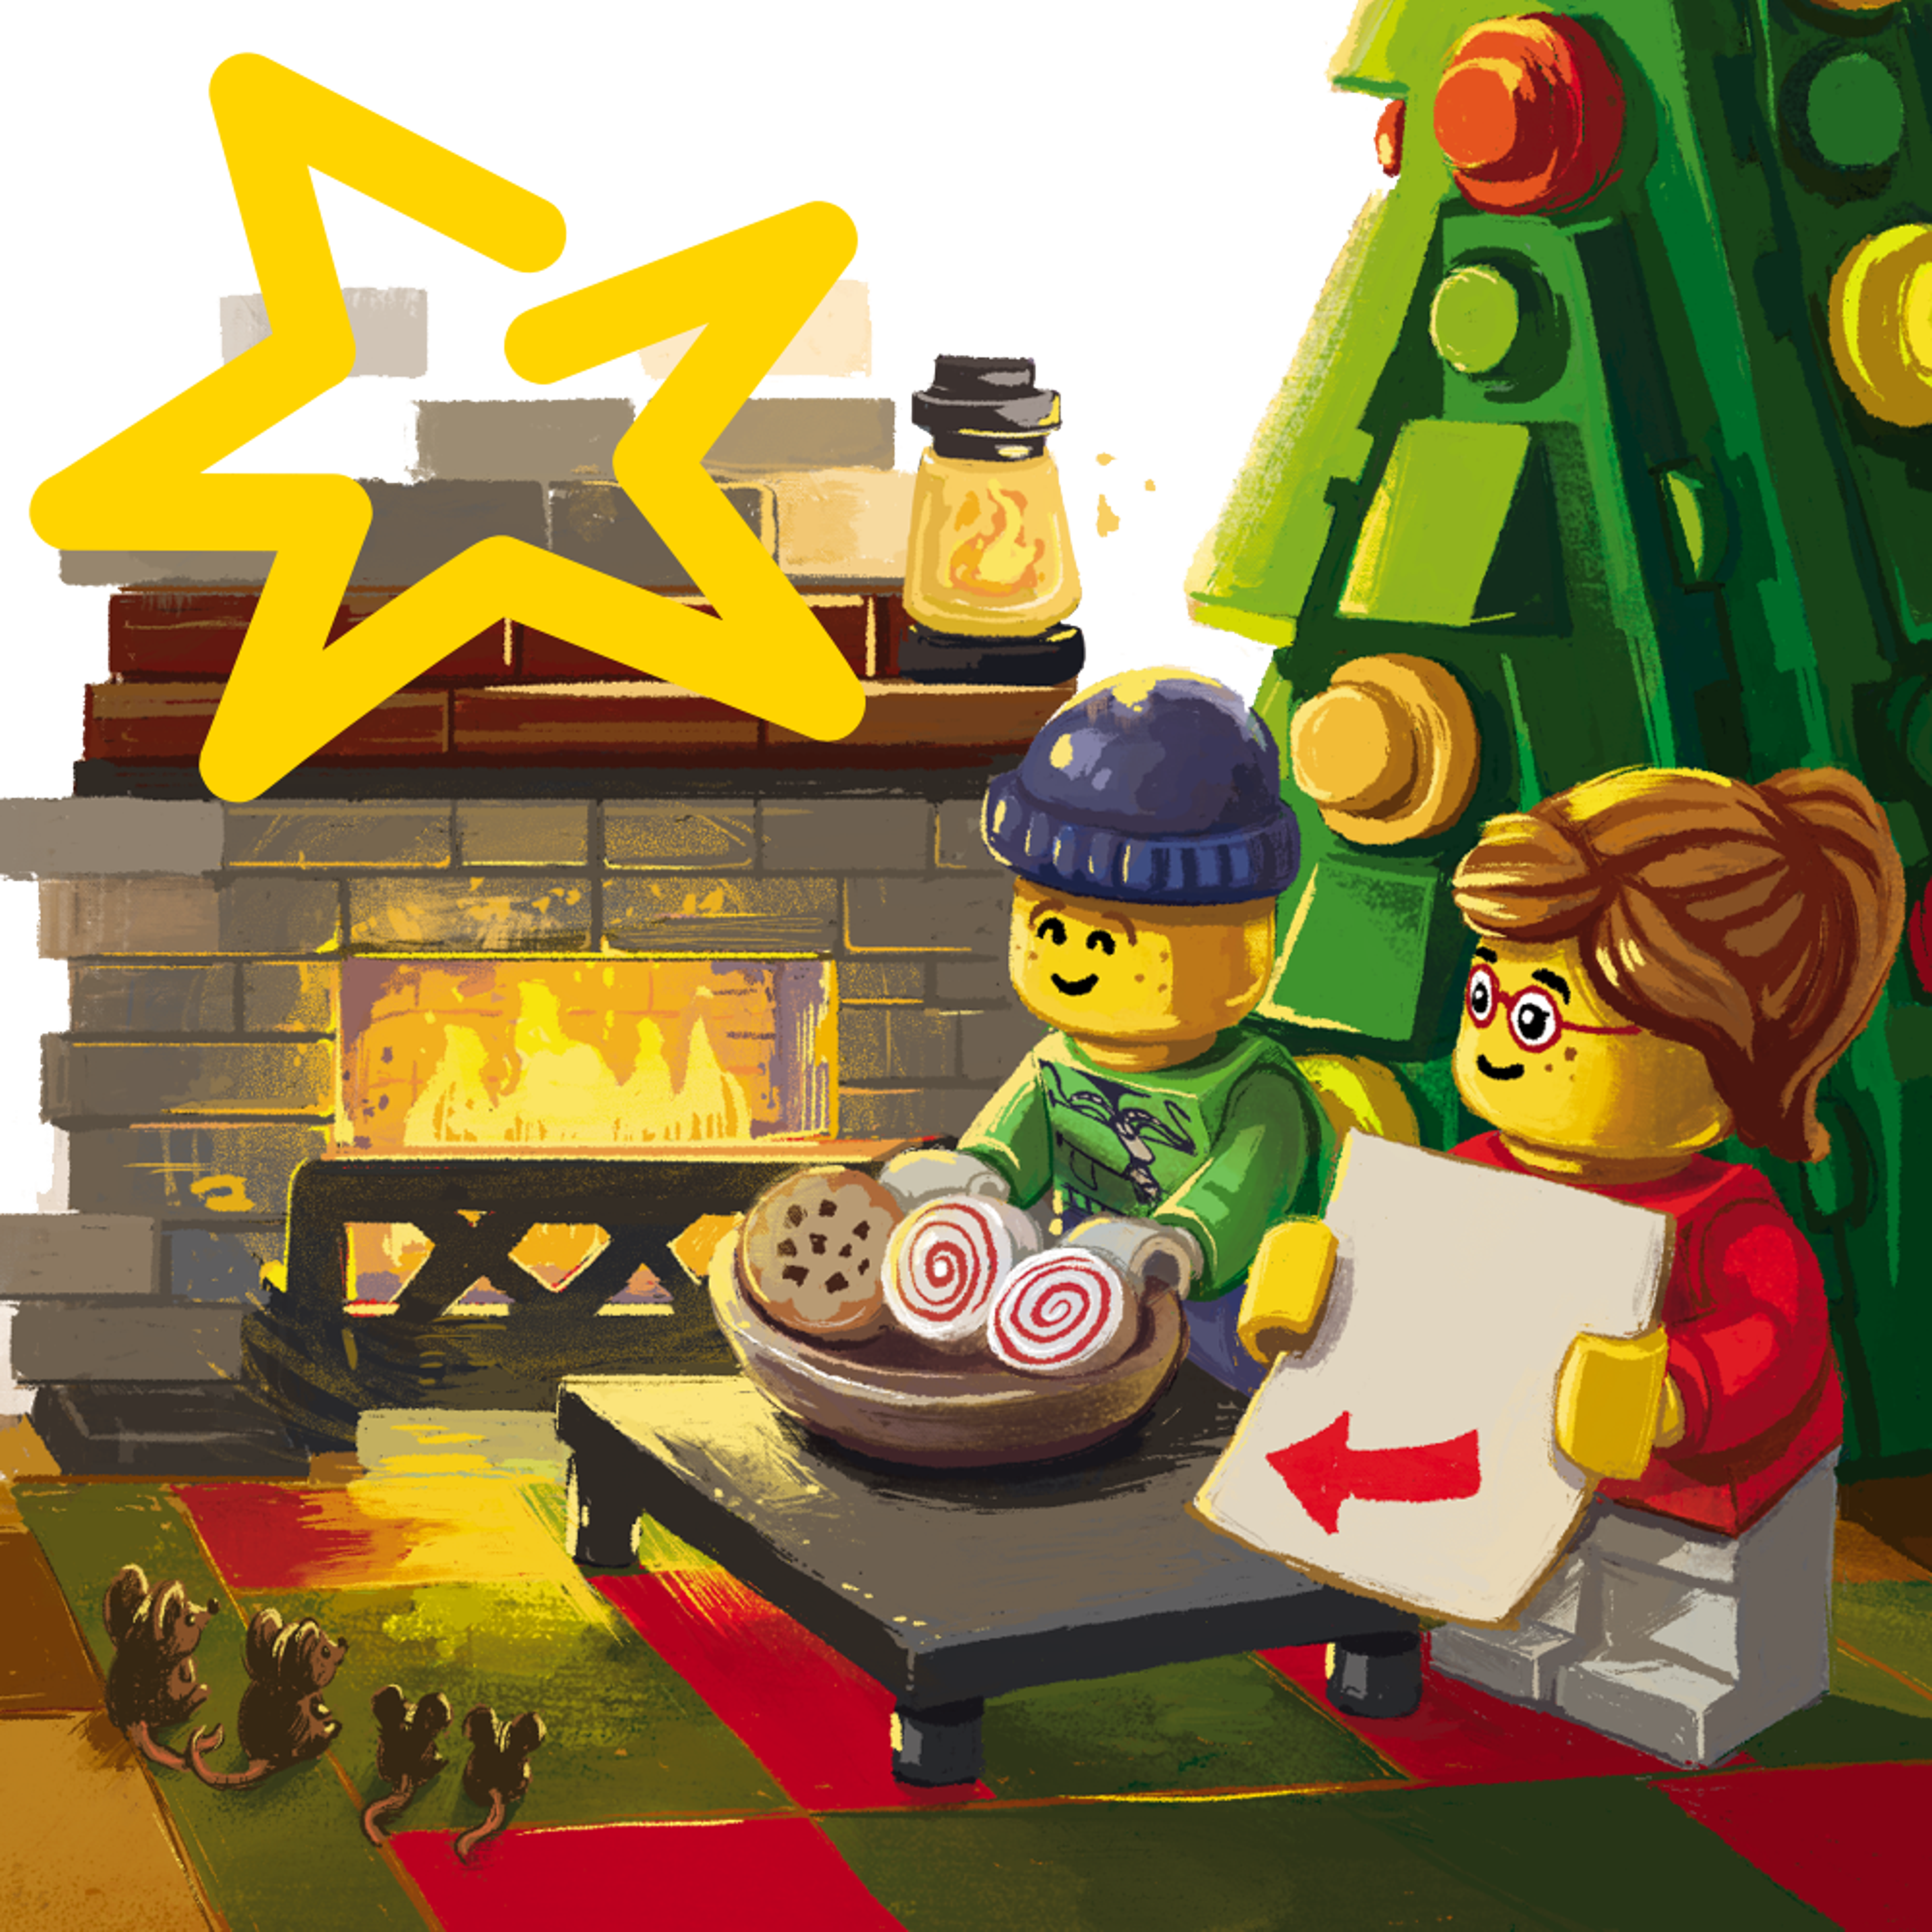 A minifigure family with cookies by the fire